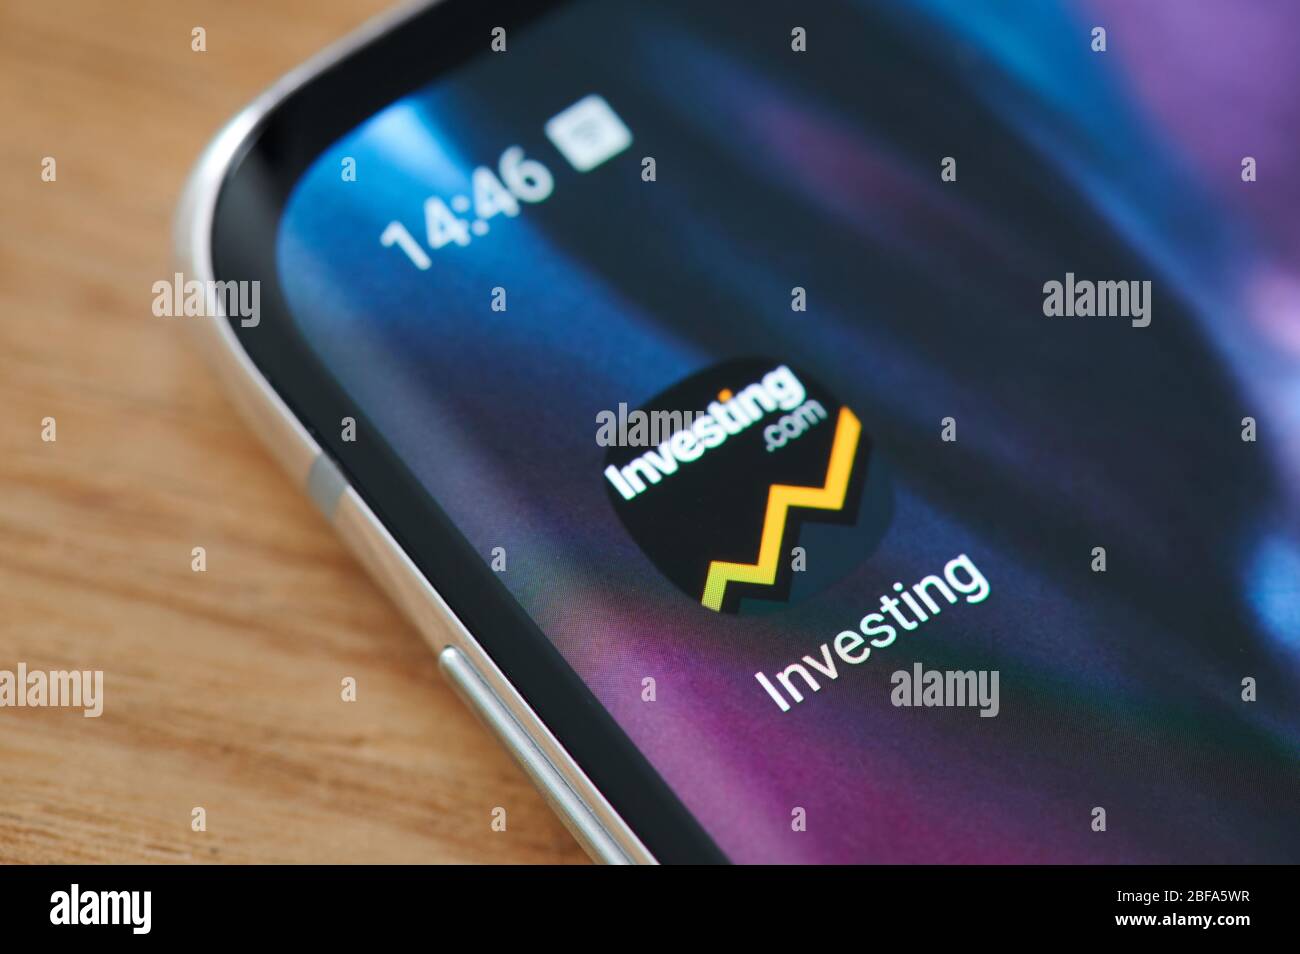 New-York , USA - April 17 , 2020: Investing in stock app icon close up view on smartphone screen Stock Photo